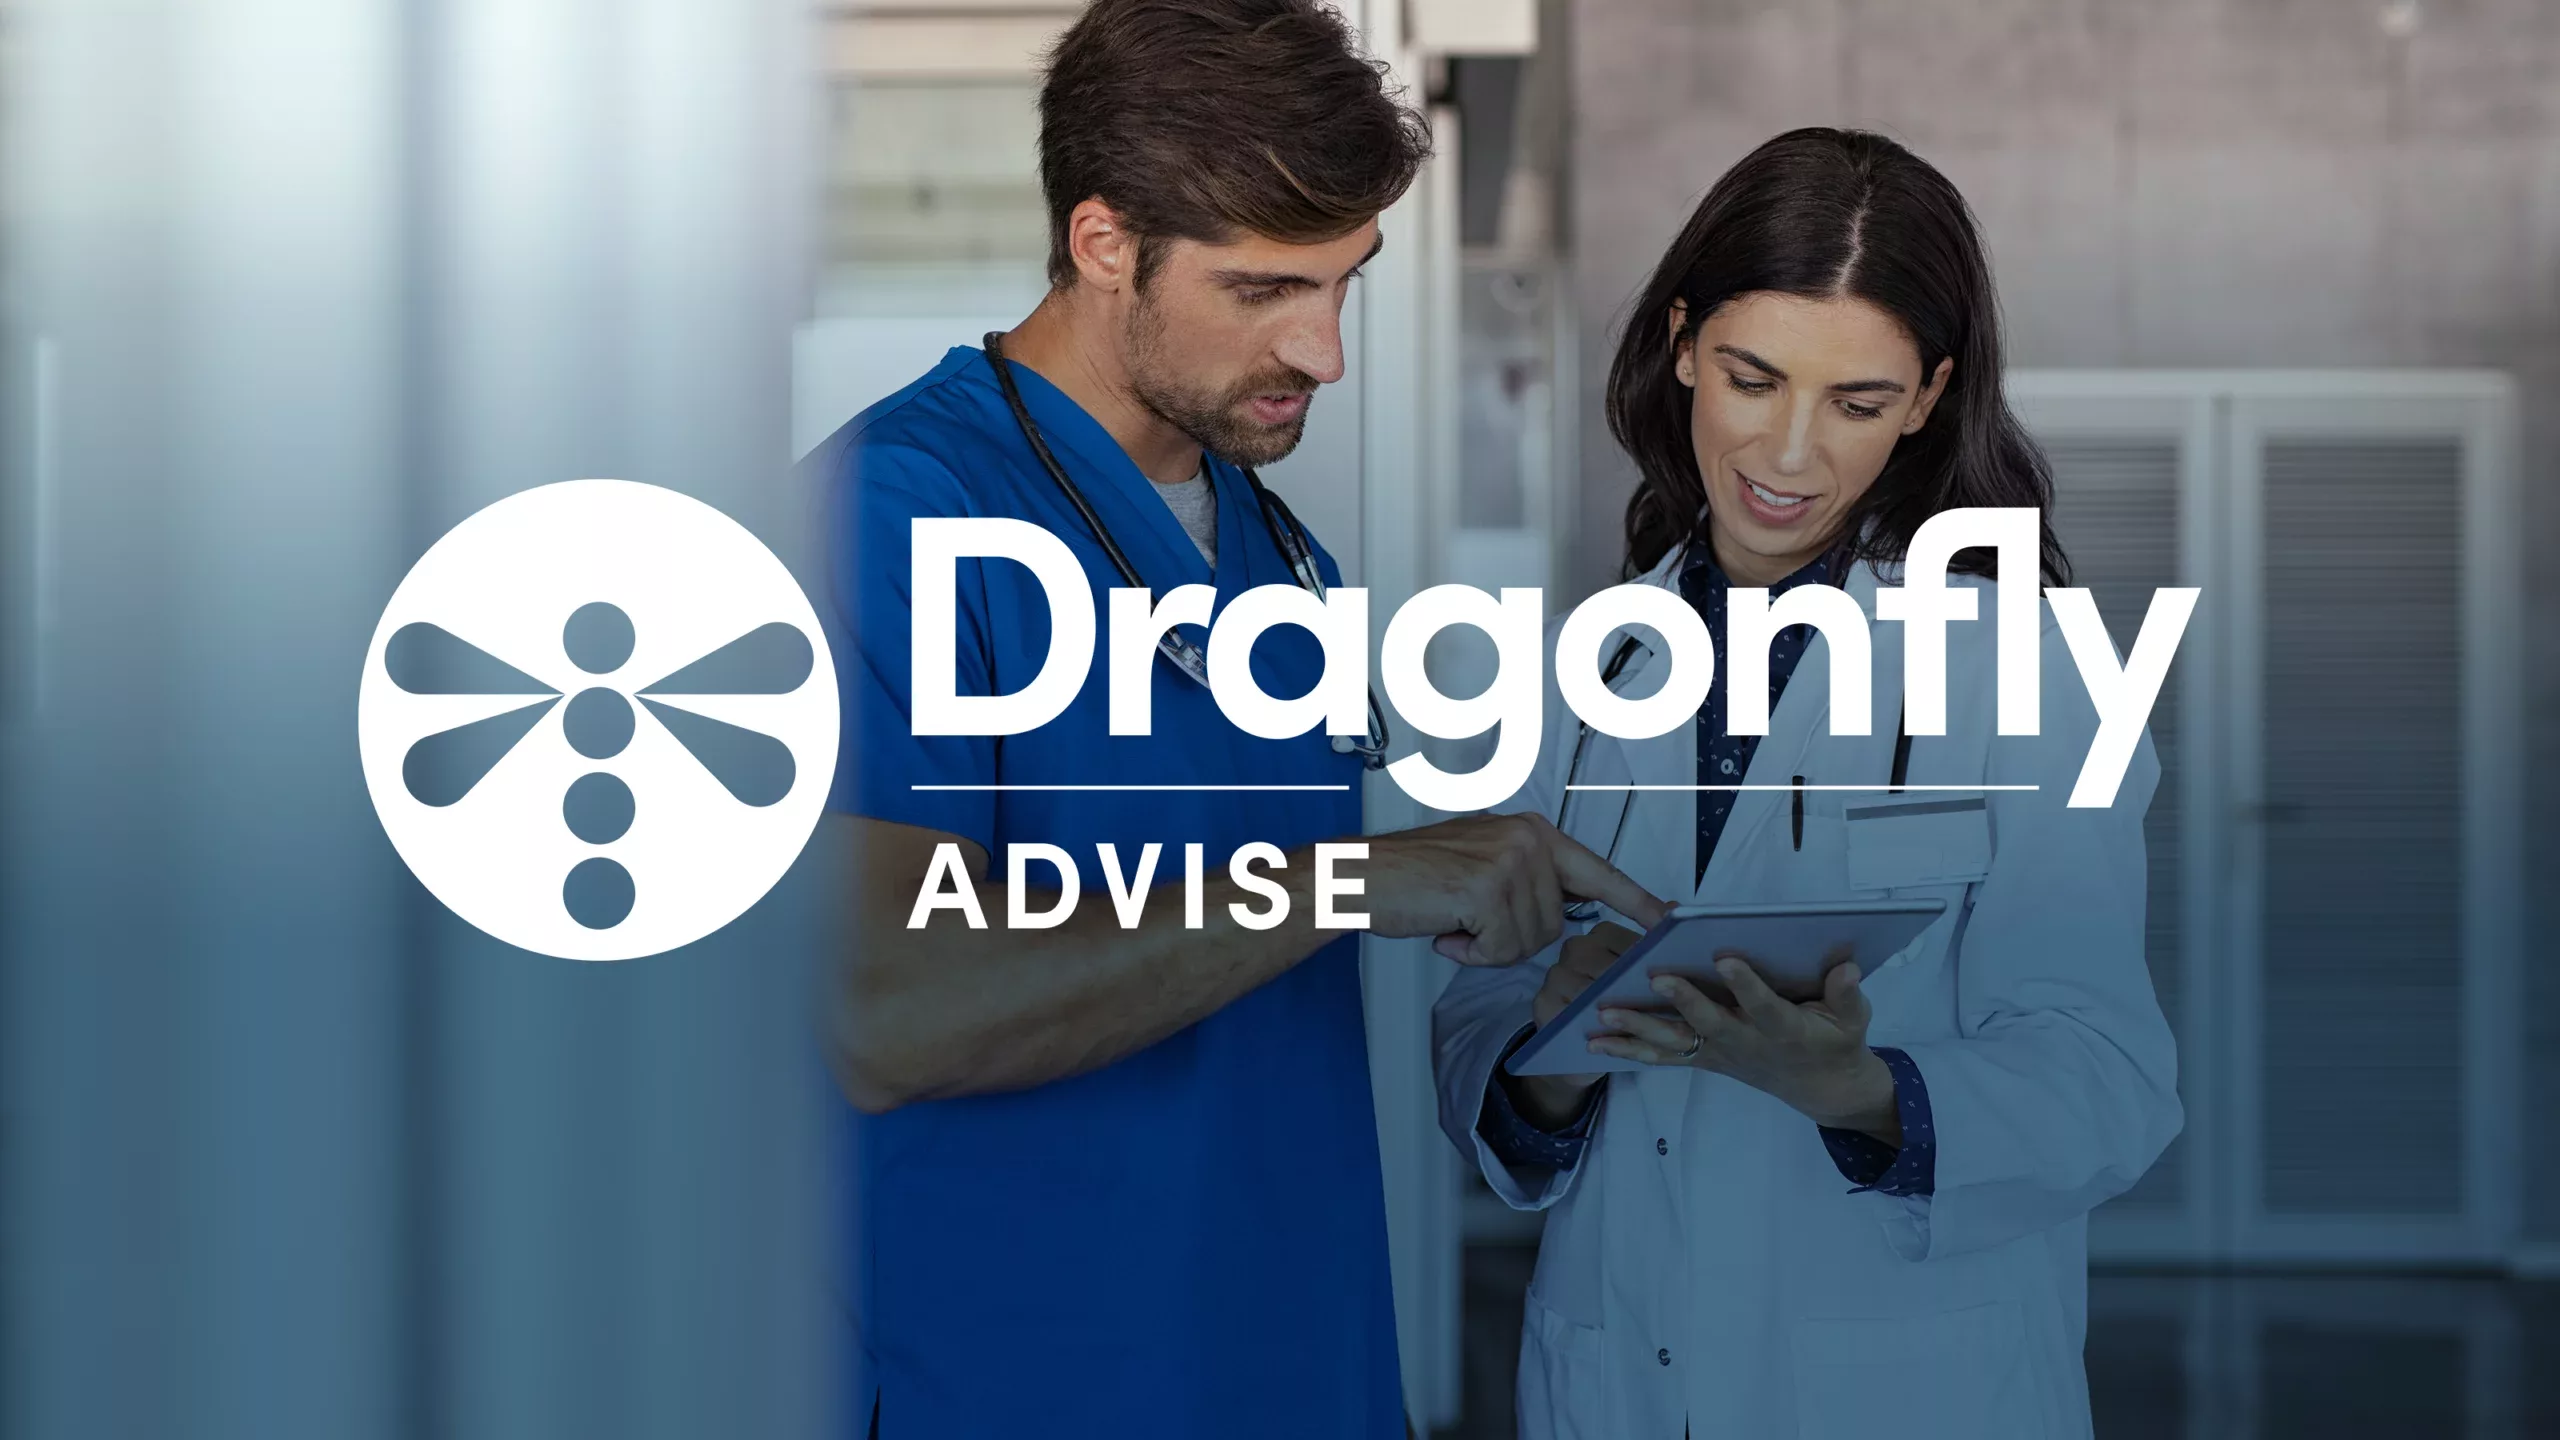 Xsolis Dragonfly advise logo over two providers talking